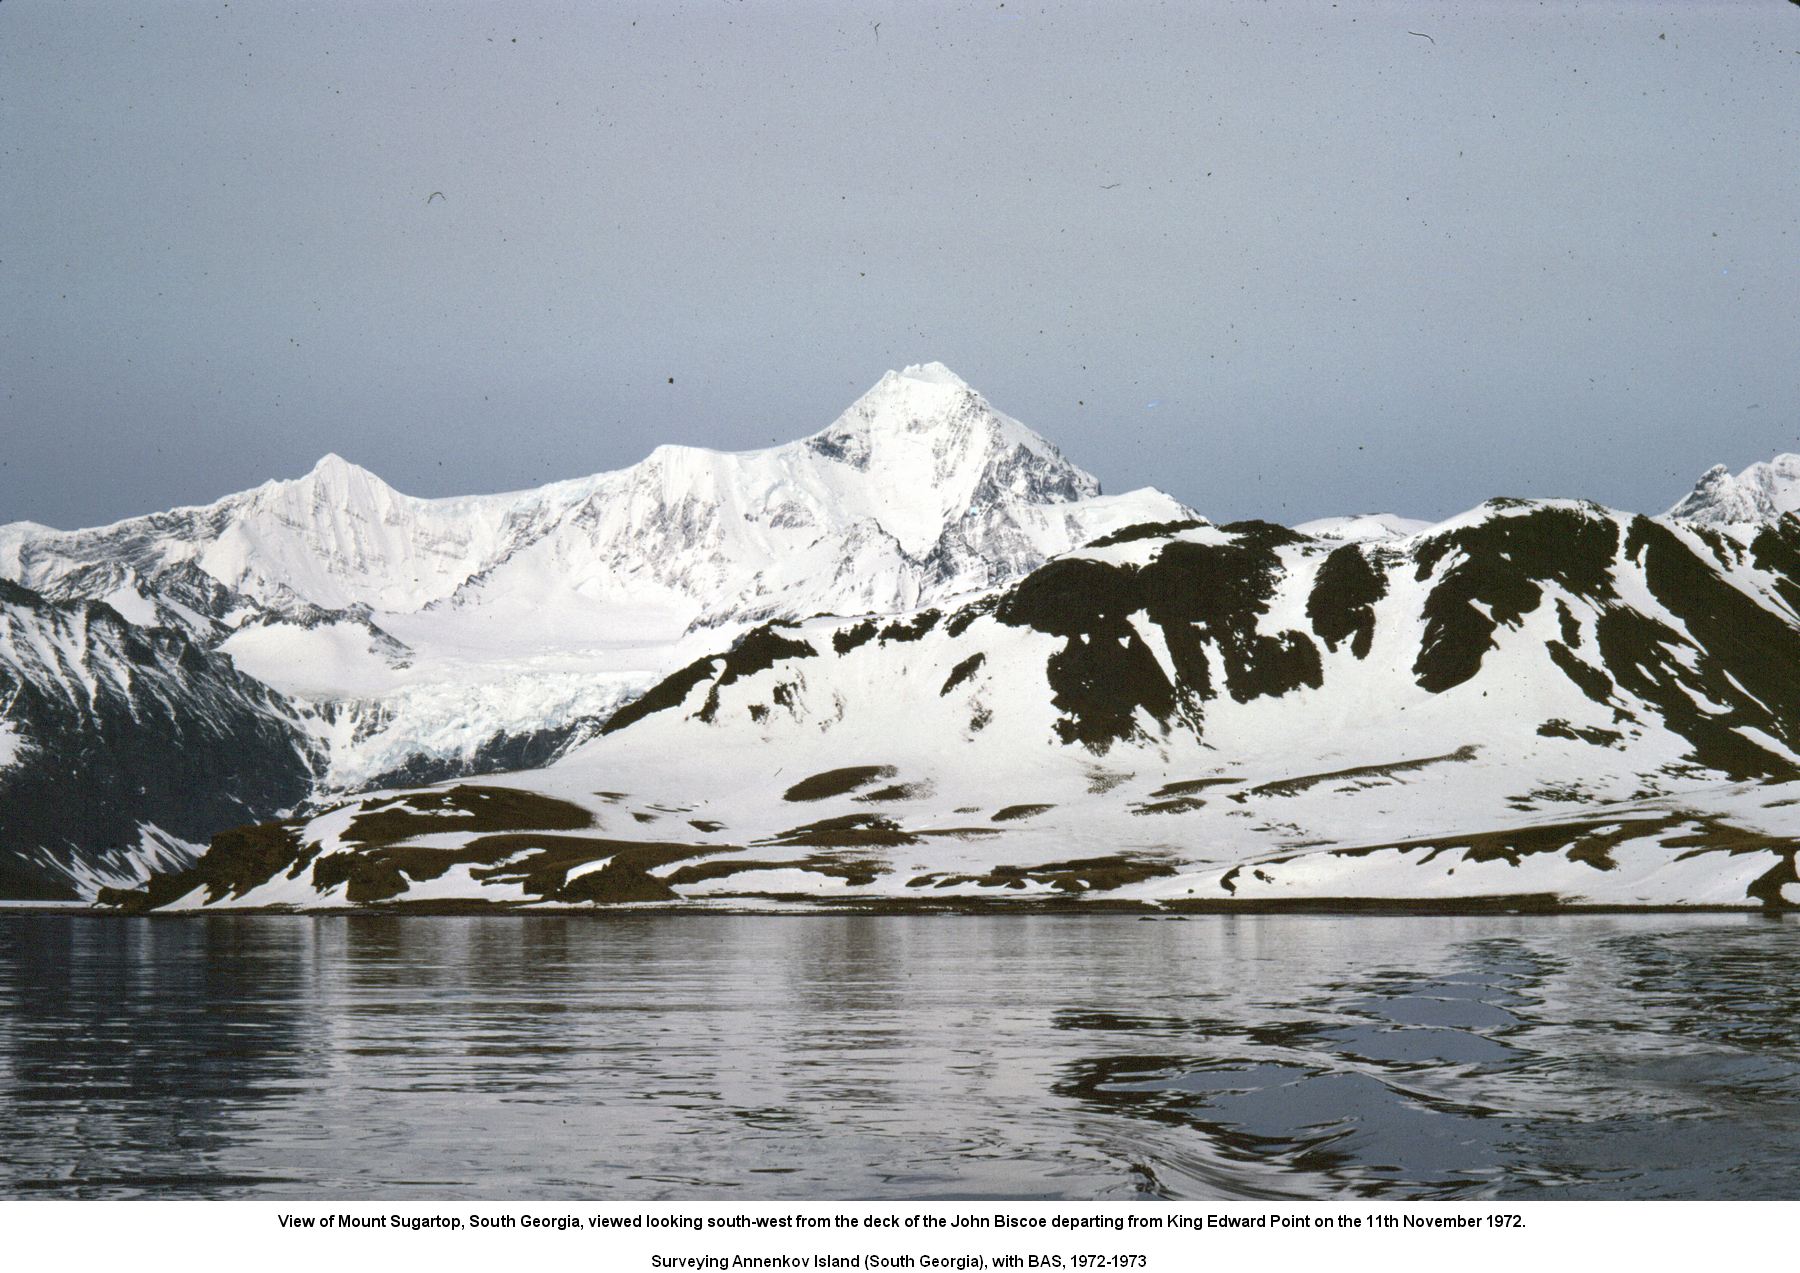 View of Mount Sugartop, South Georgia, viewed looking south-west from the deck of the John Biscoe departing from King Edward Point on the 11th November 1972.